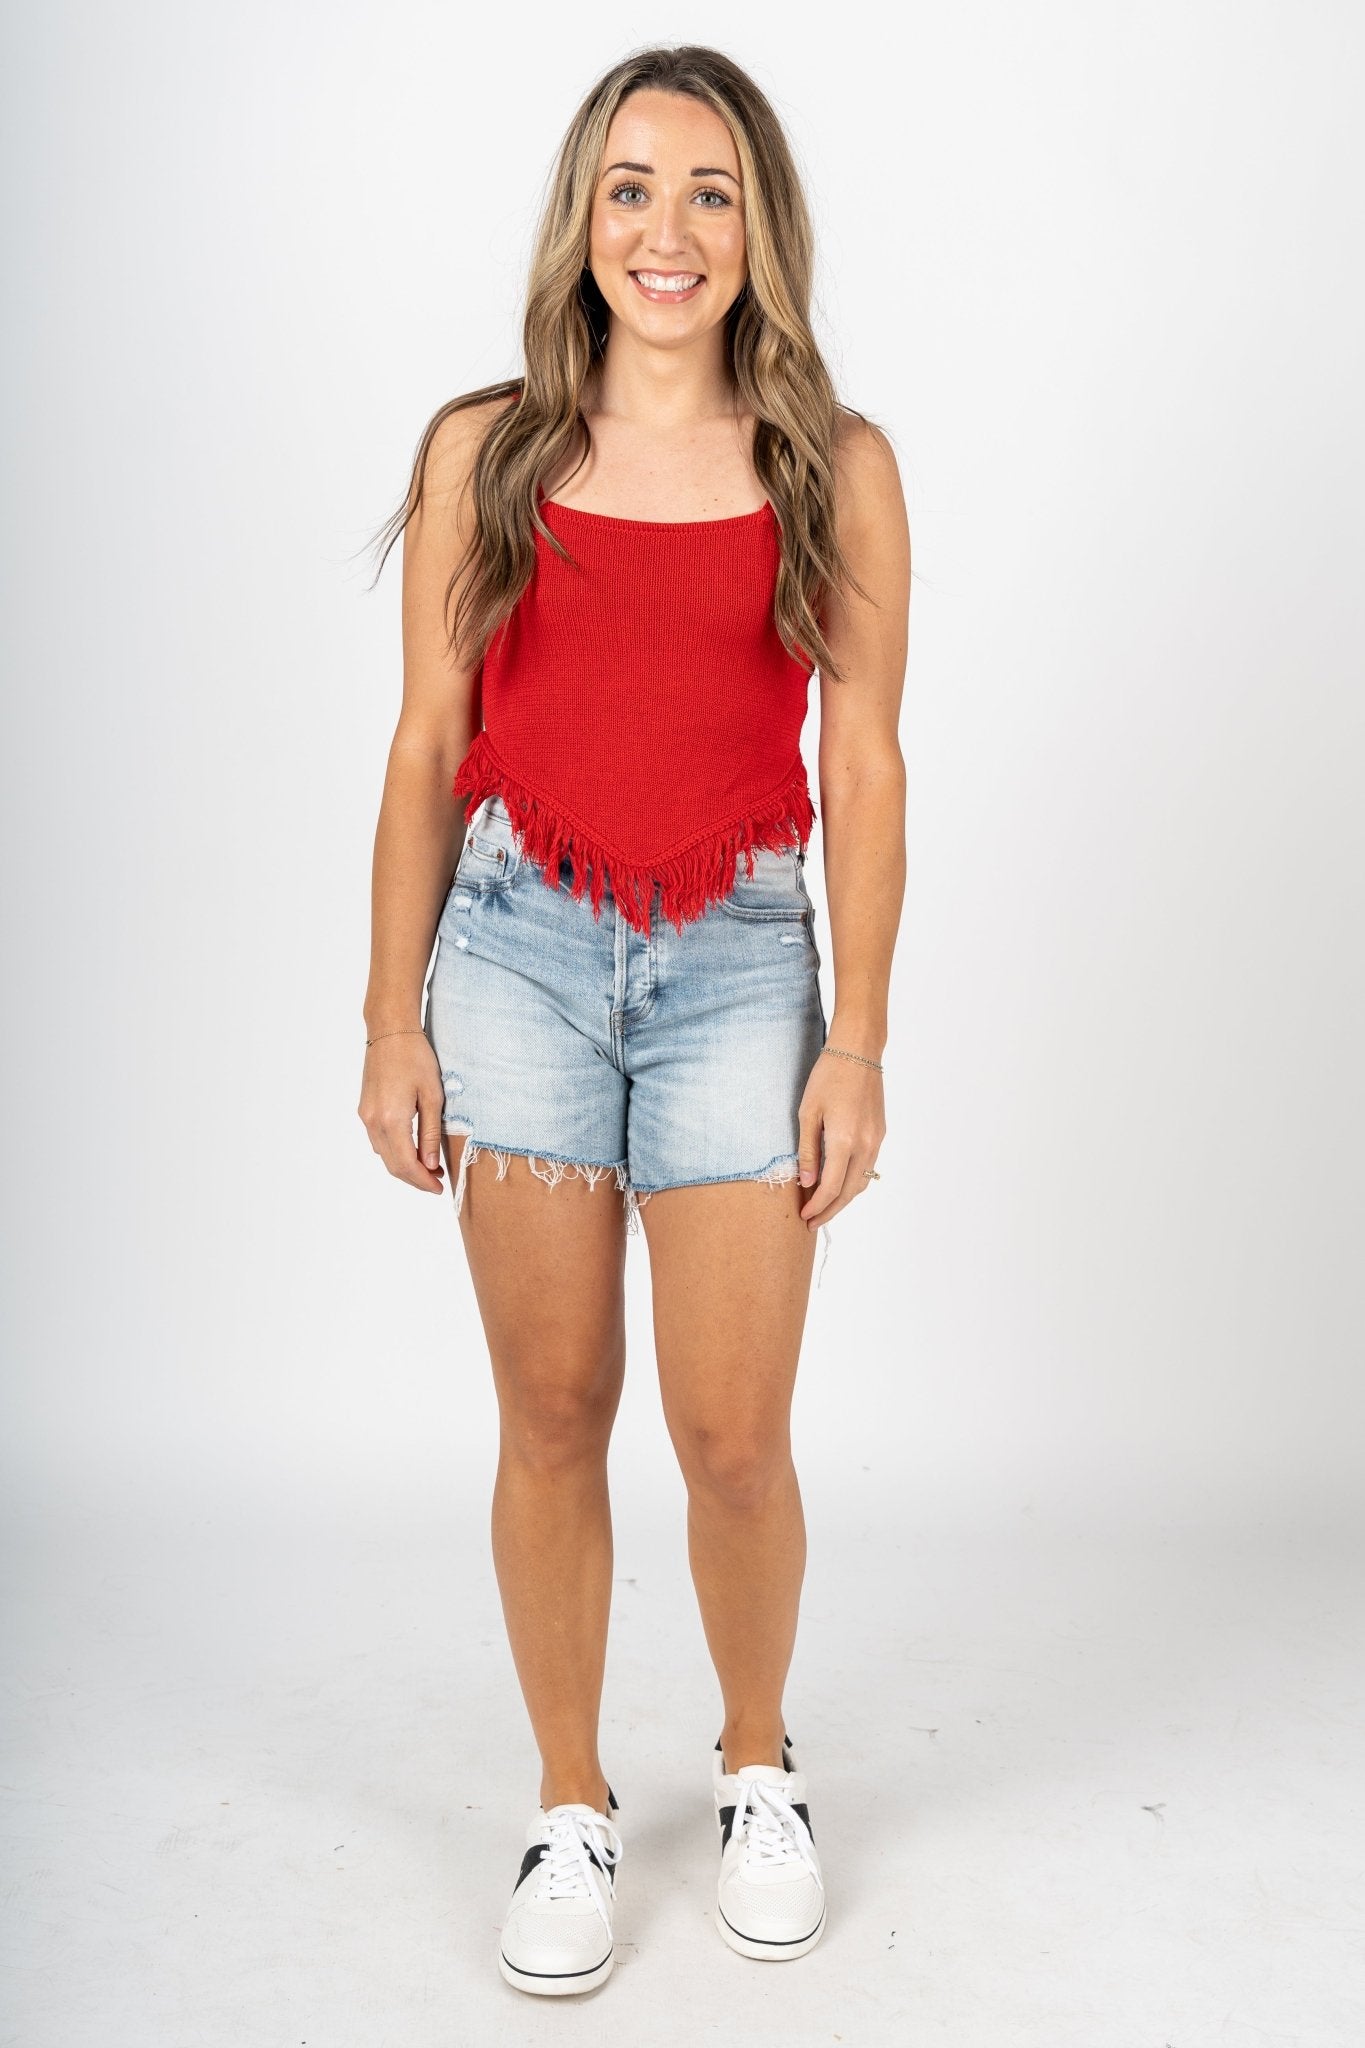 Fringe knit tank top red - Trendy tank top - Fashion Tank Tops at Lush Fashion Lounge Boutique in Oklahoma City